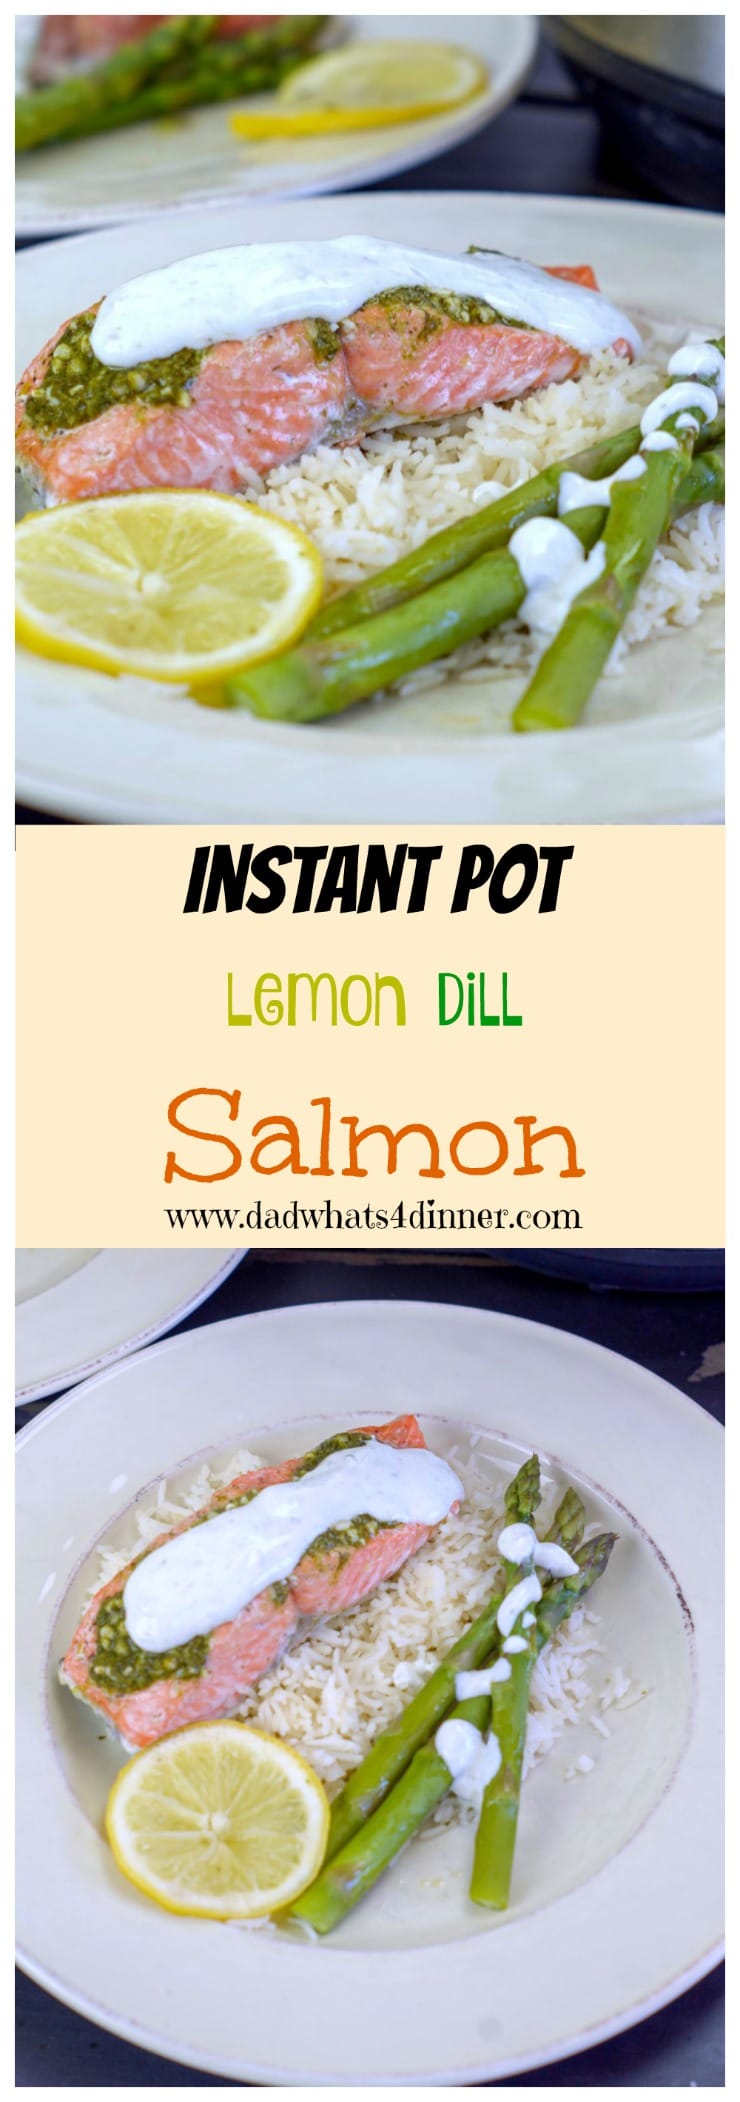 Pinterest image of Instant Pot Lemon Dill Salmon from www.dadwhats4dinner.com #ad #InstantPot #salmon #Dill #Healthy #lowfat